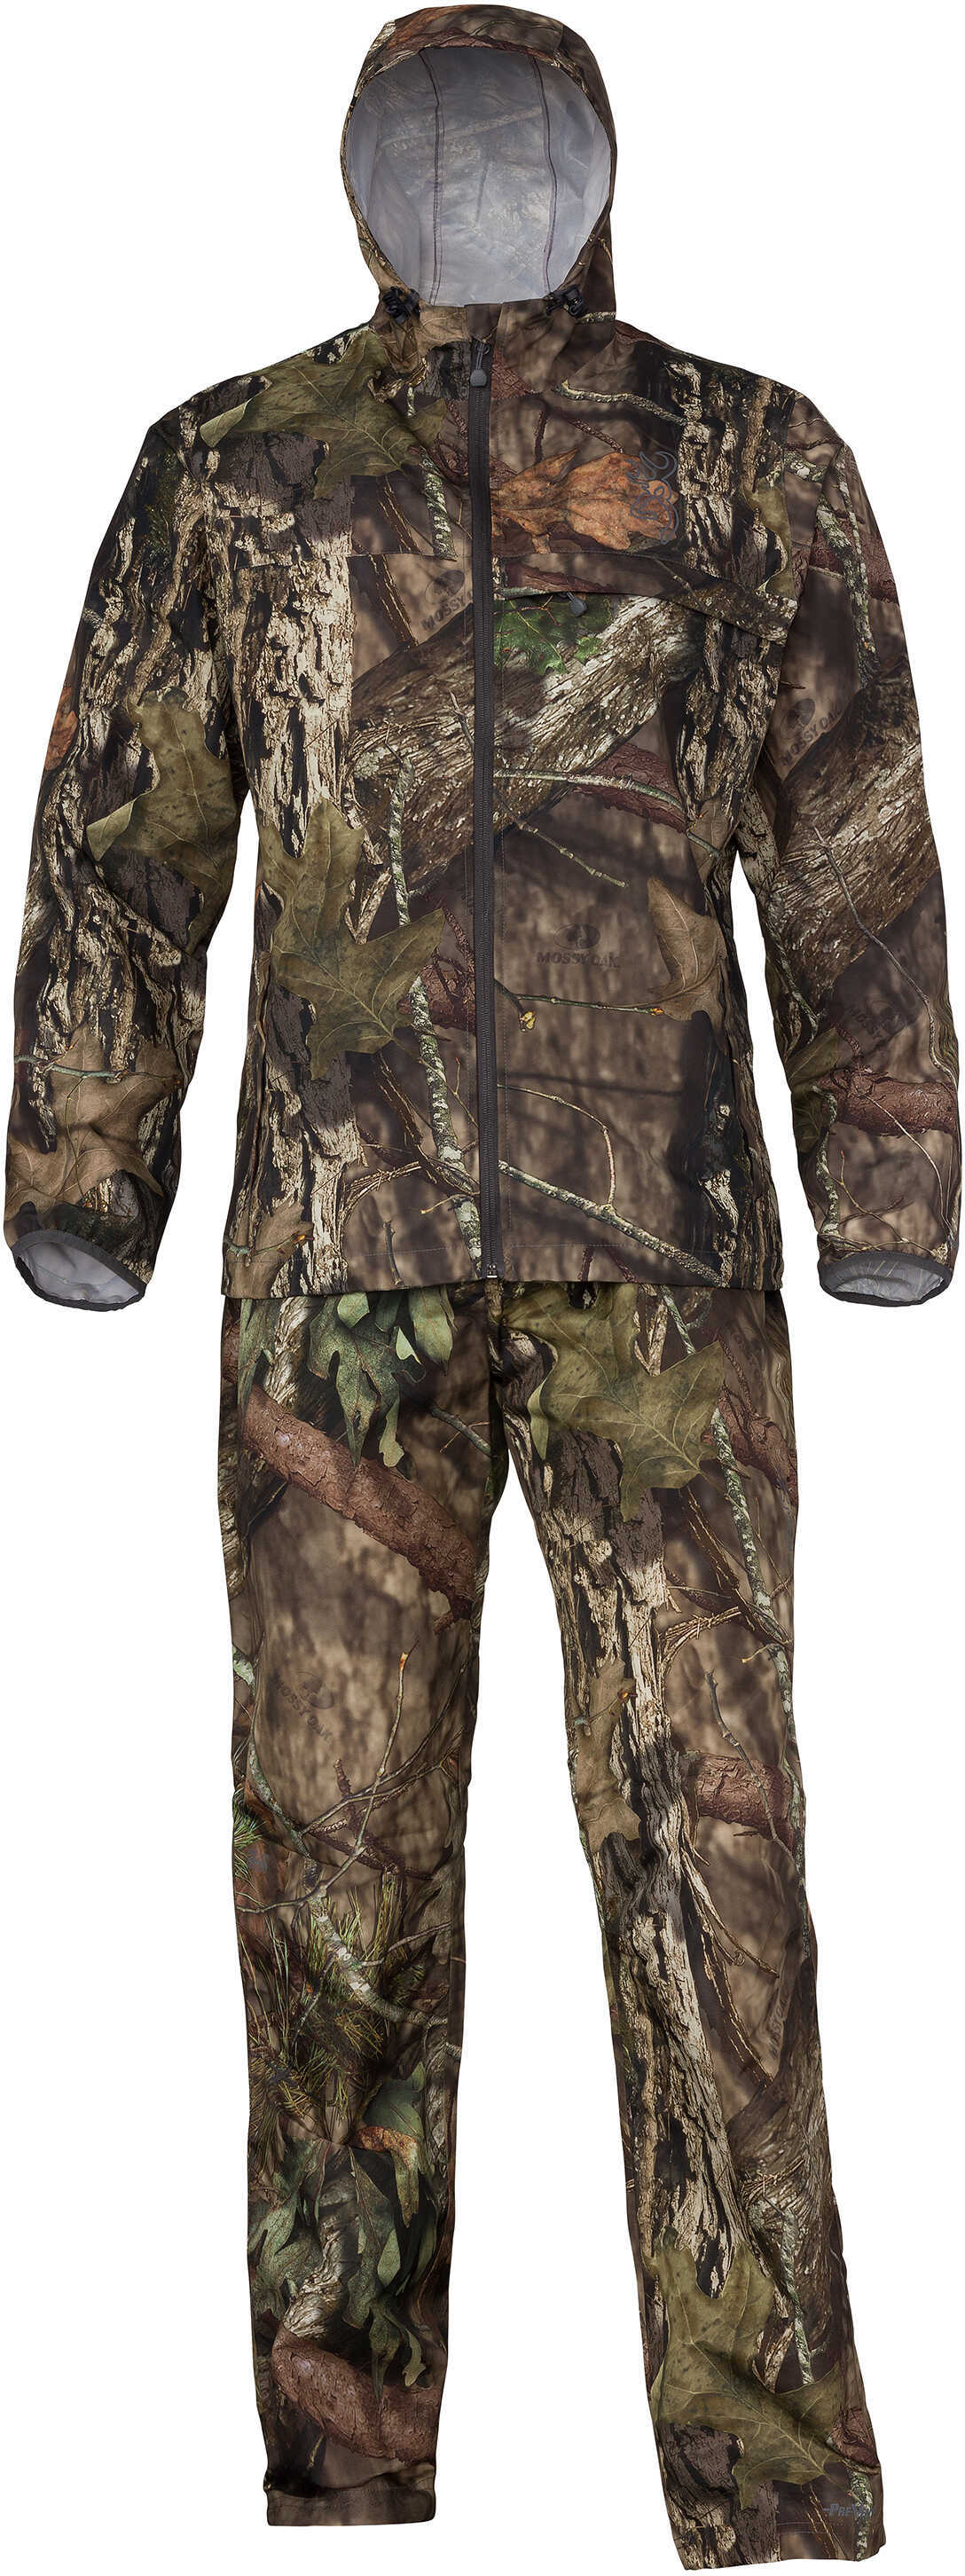 Browning Hell's Canyon CFS-WD Rain Suit Size: XL (Mossy Oak Break-Up Country)